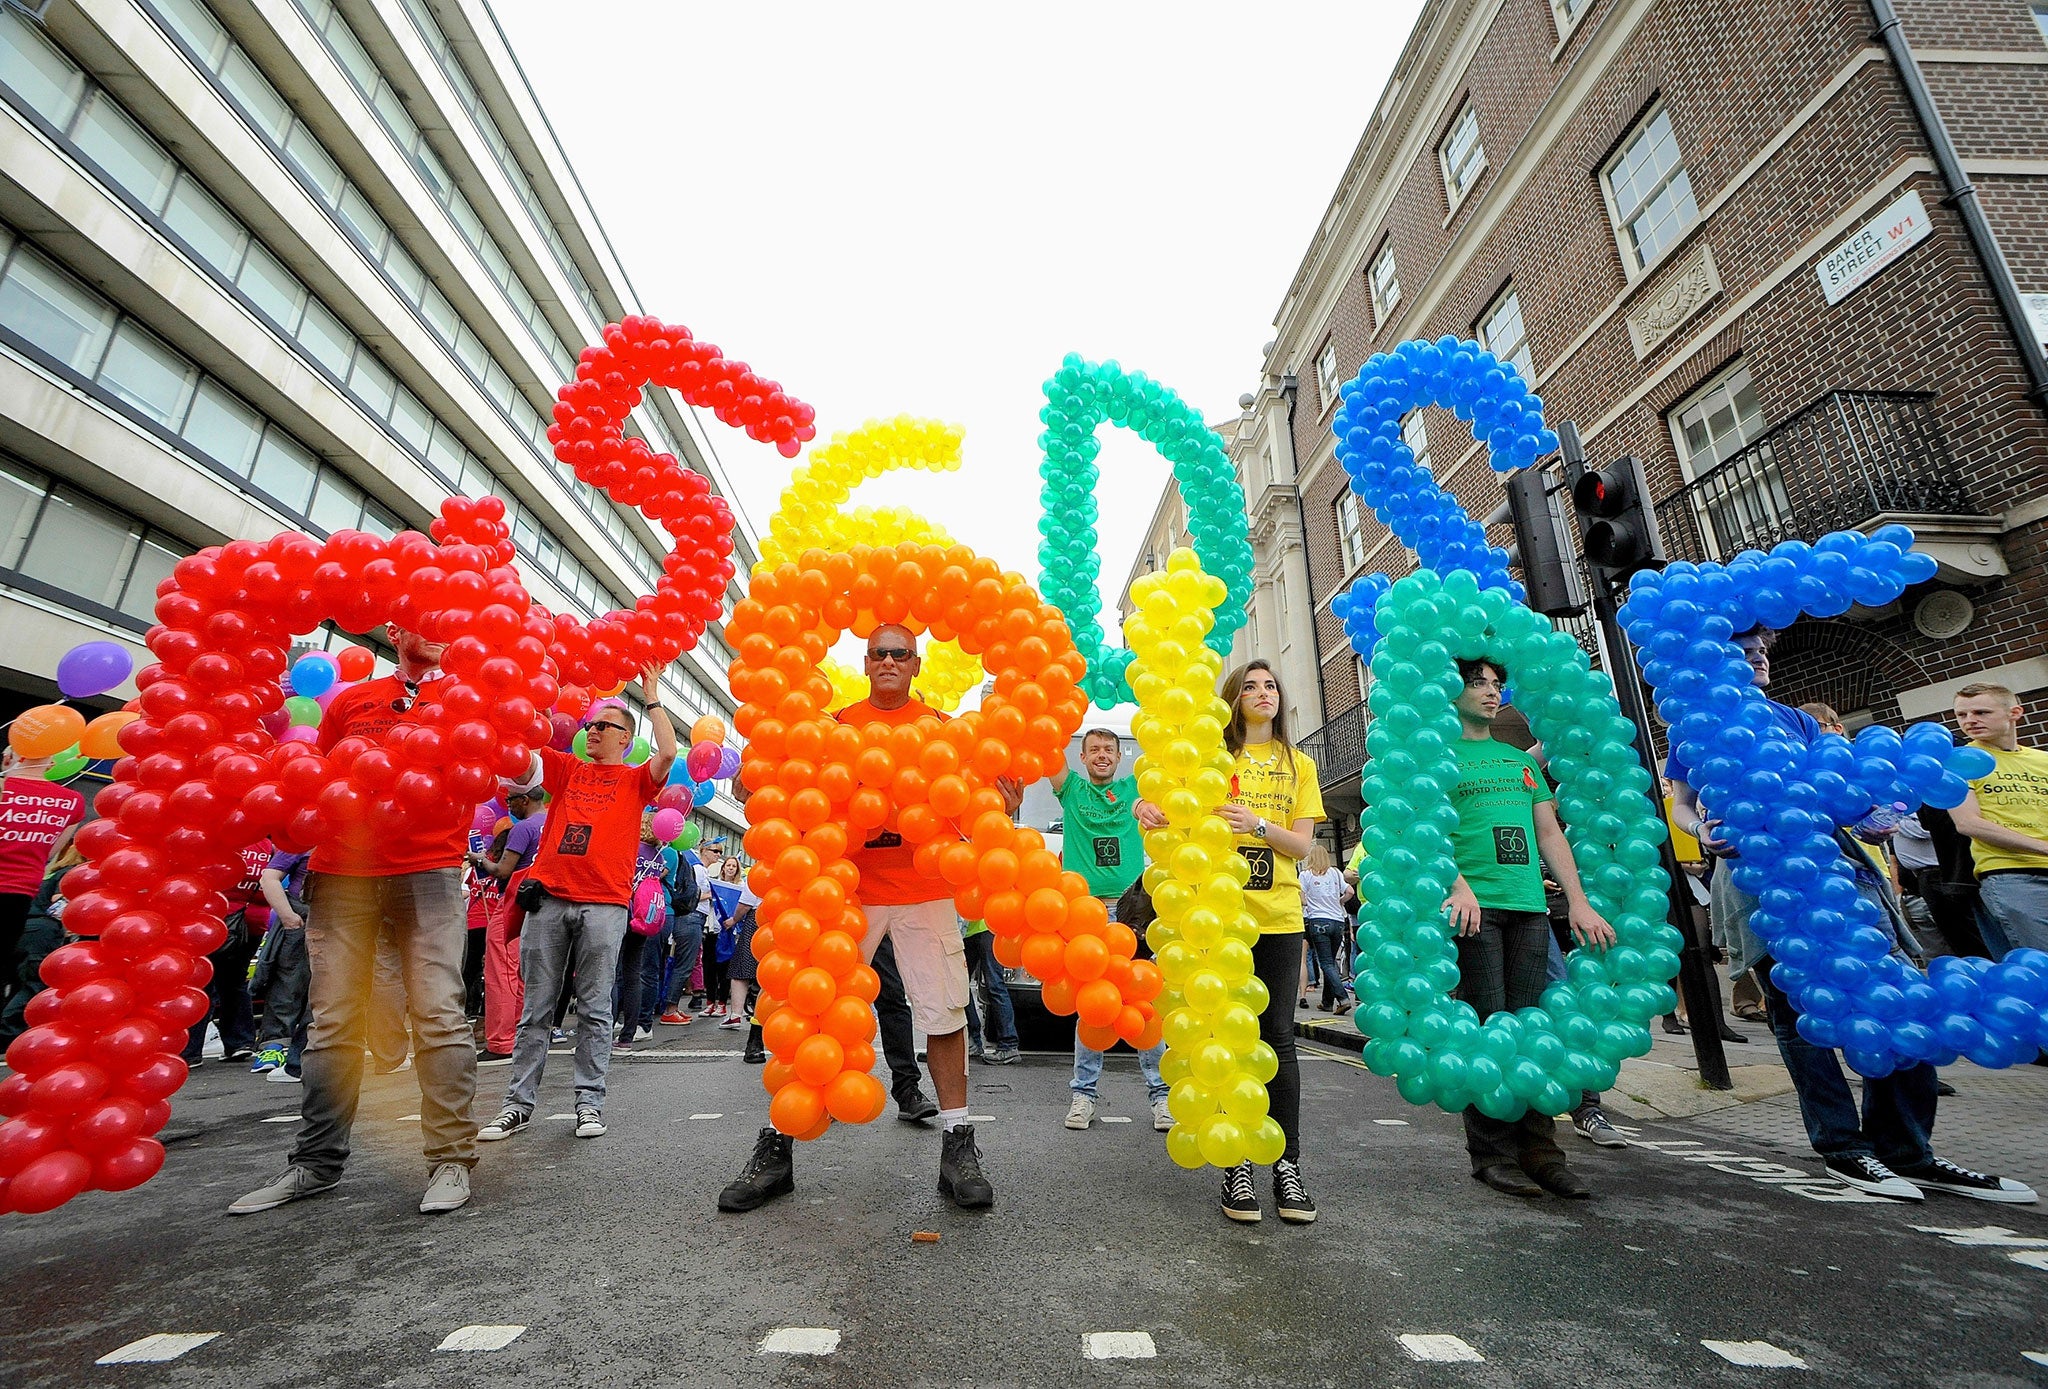 Thousands of participants show up for the annual Gay Pride Parade in London